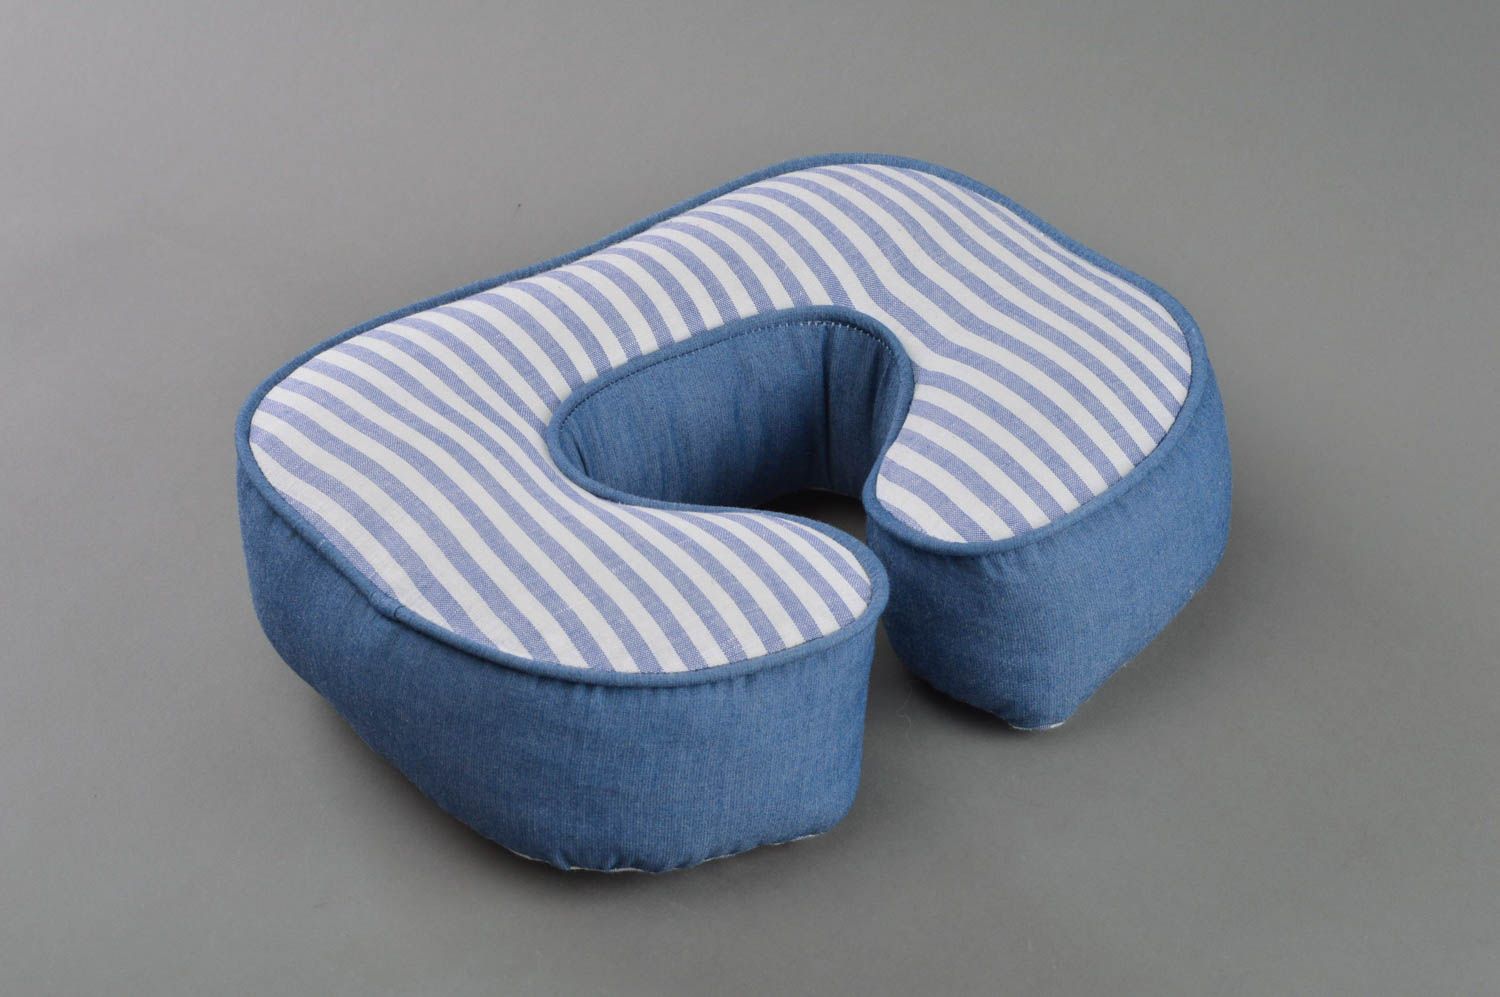 Homemade decorative soft toy pillow letter C sewn of blue and stripped fabric photo 2